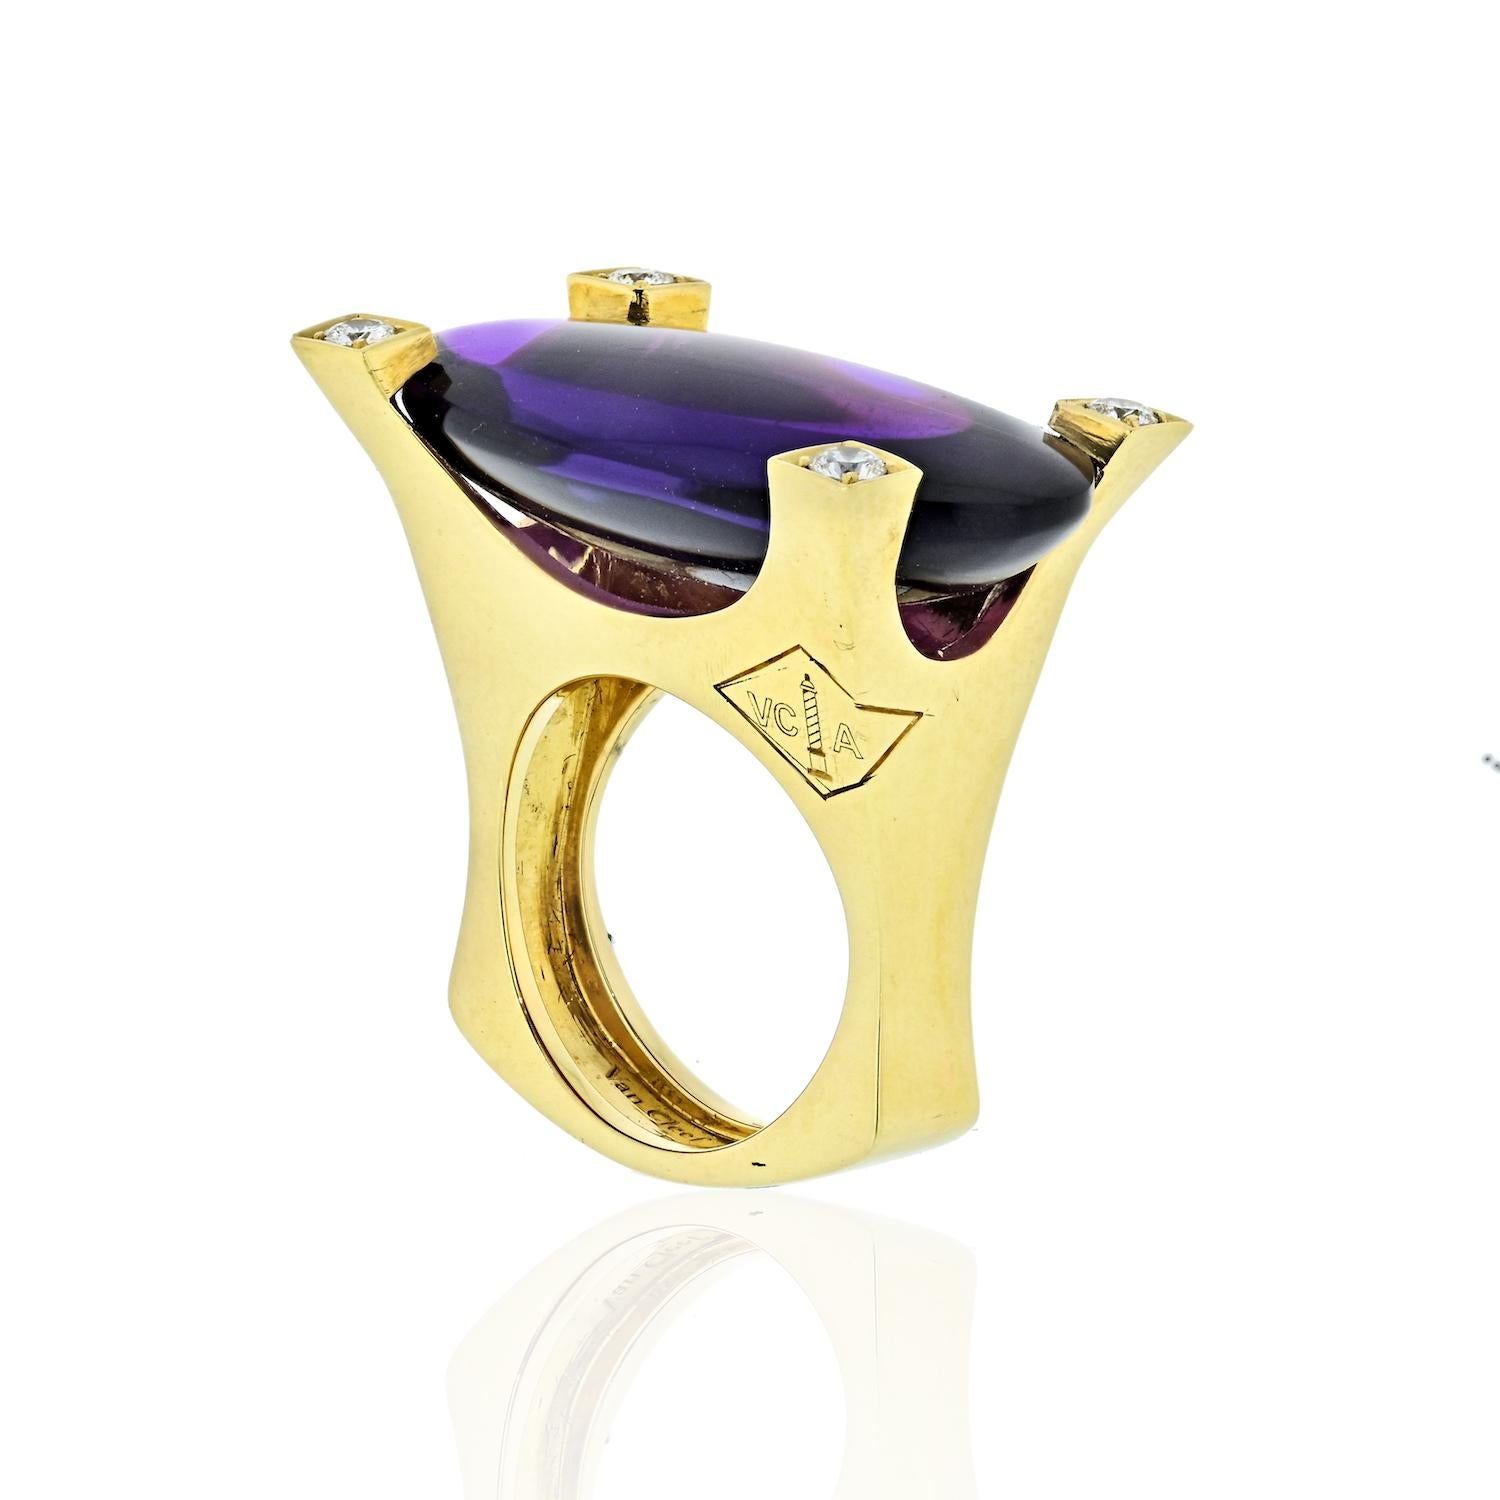 A bold cocktail ring by Van Cleef & Arpels. The central 25 carat oval cabochon amethyst mounted in four heavy claws, each claw set with a single brilliant-cut diamond. VCA logo engraved to the side of the squared shank. Signed VCA and numbered. With